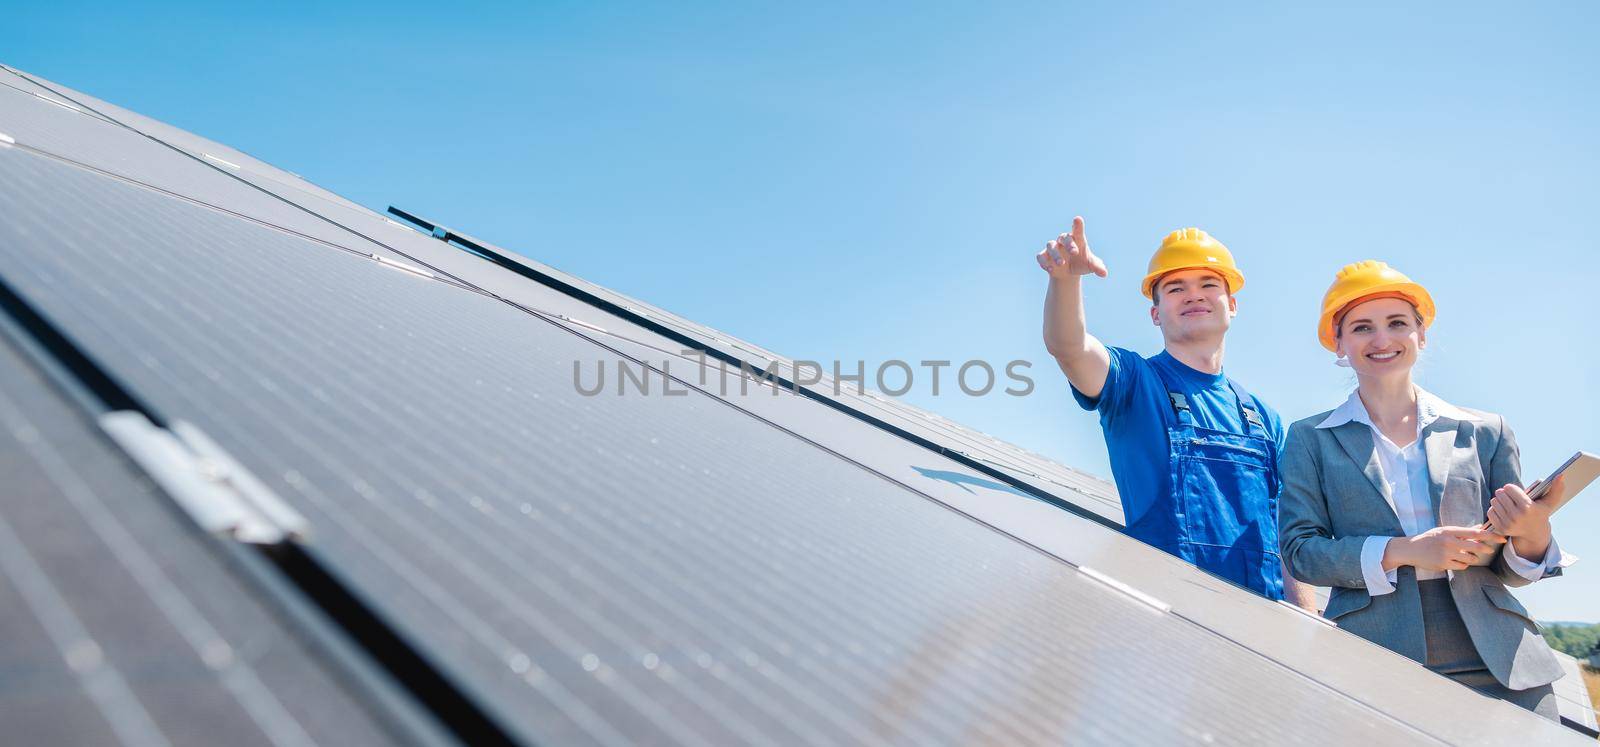 Manager and worker in photovoltaic power plant discussing maintenance of the solar farm